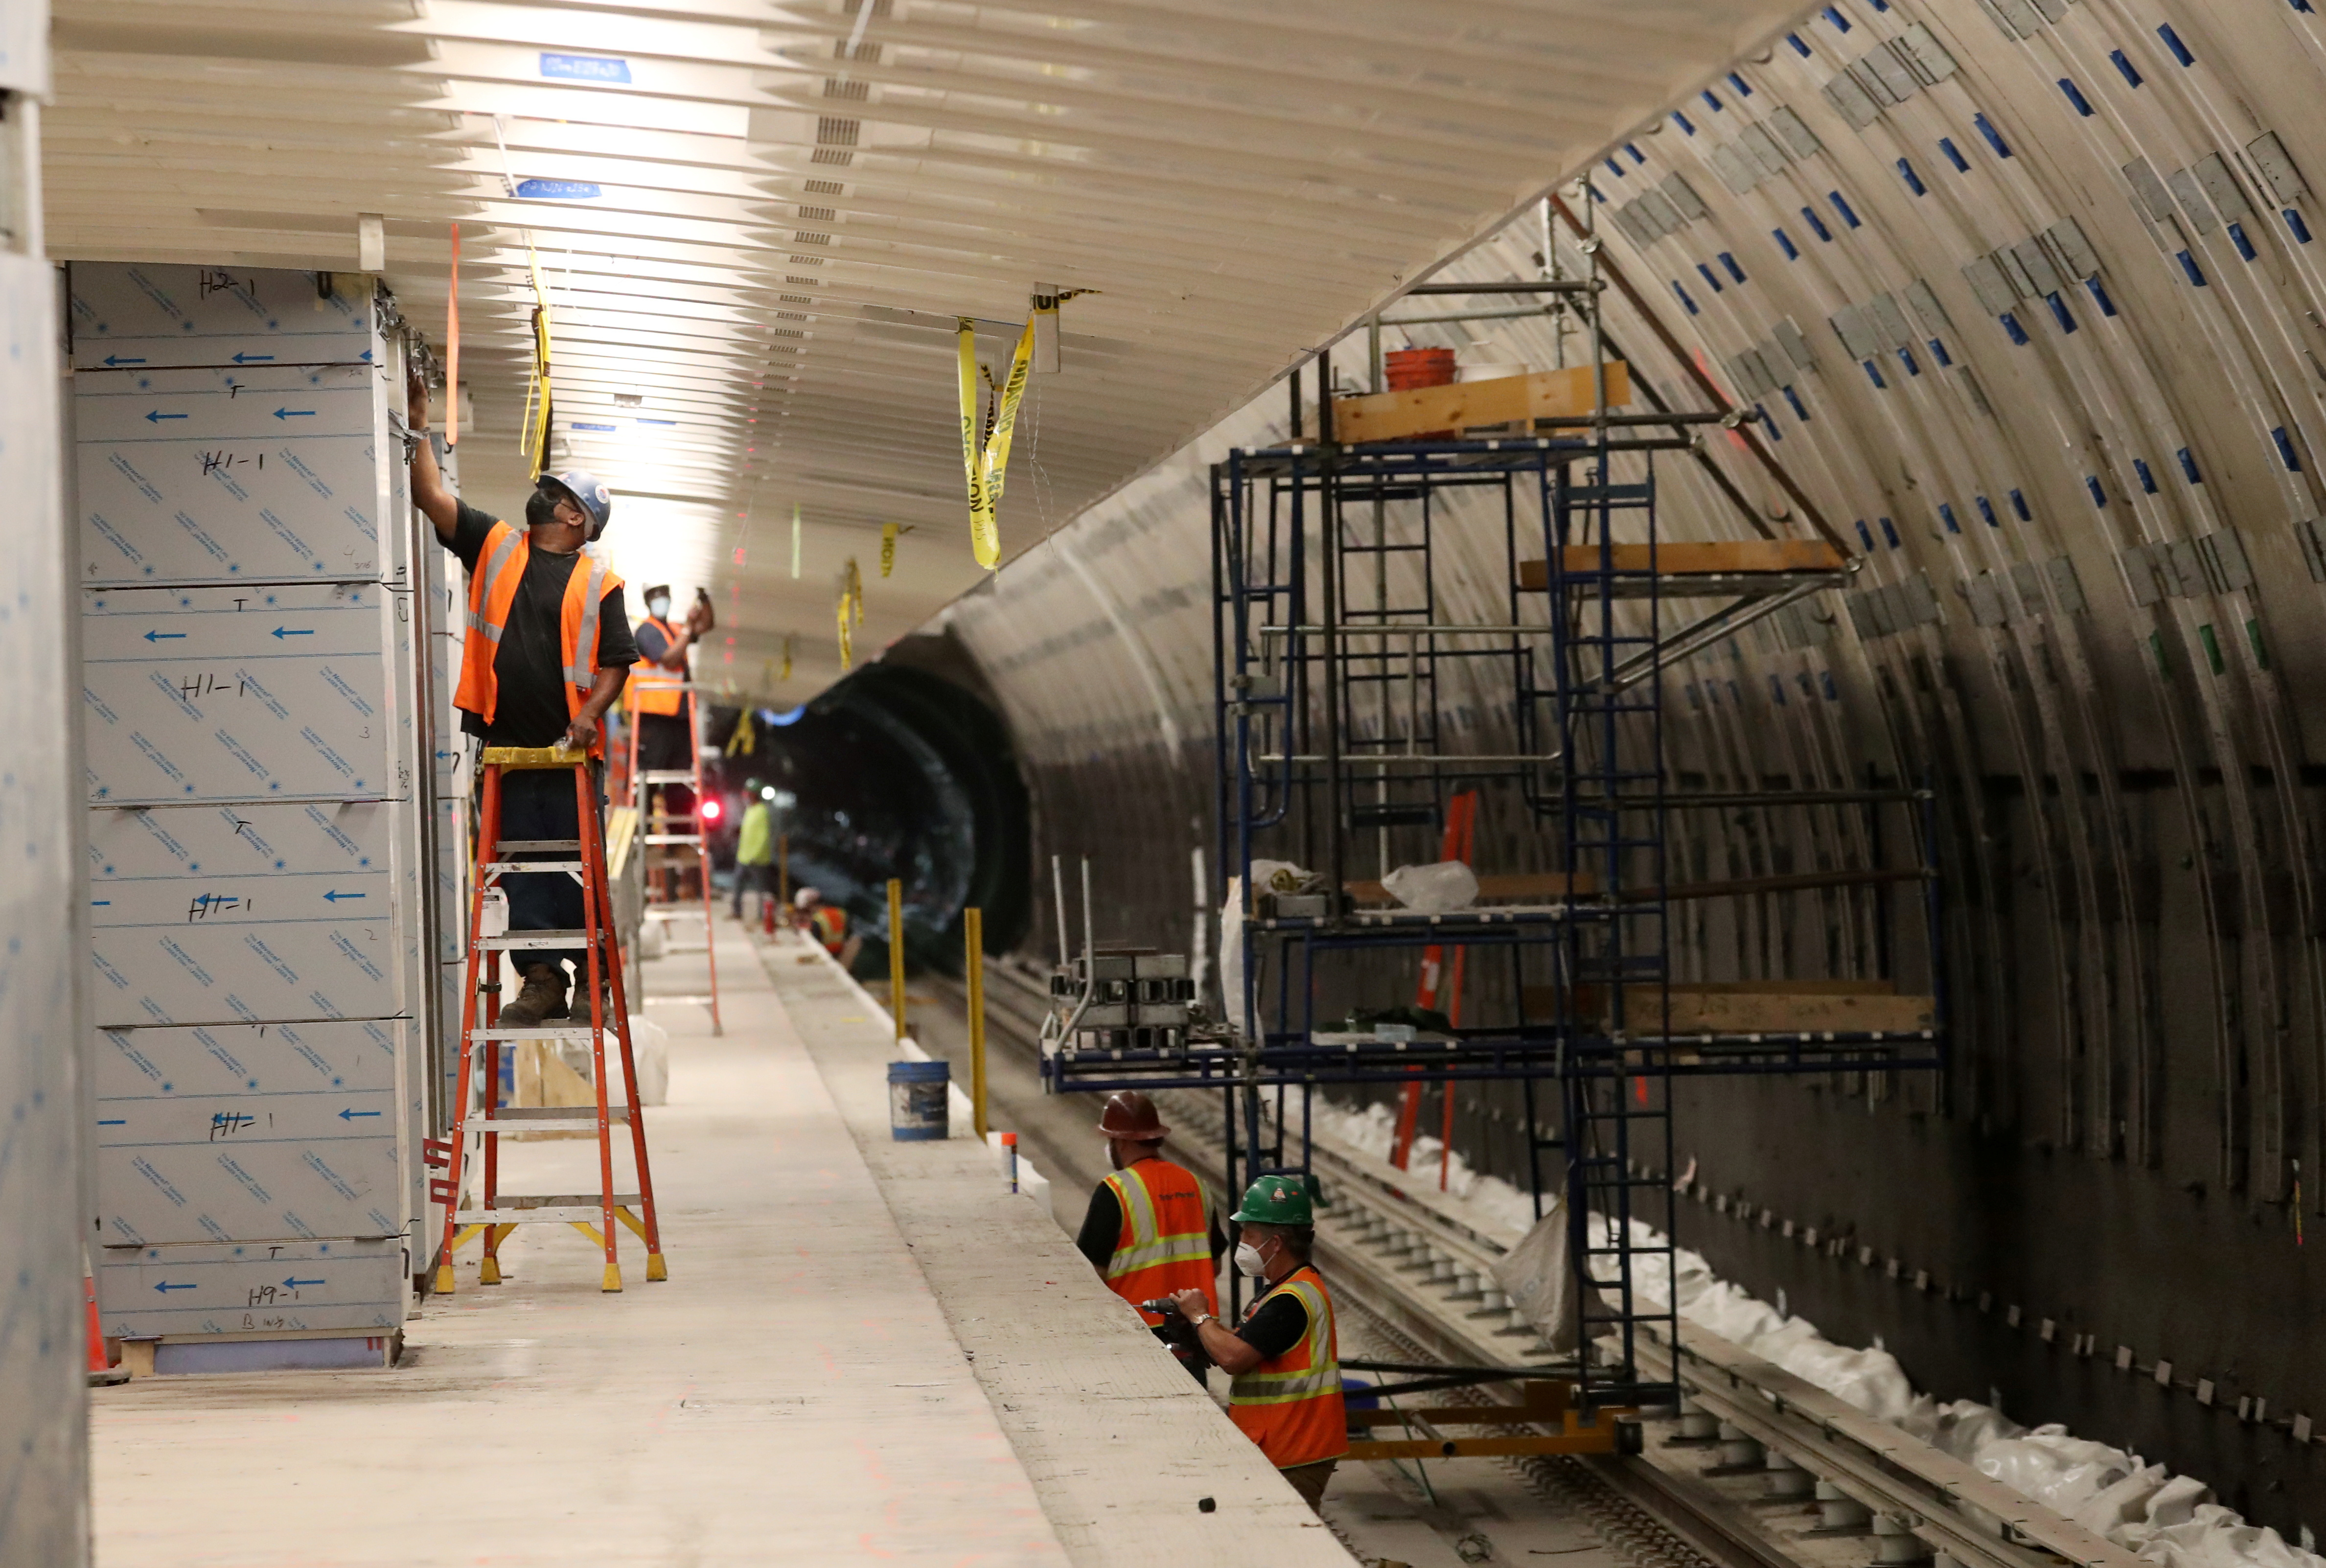 MTA's East Side Access for the Long Island Railroad connection to Grand Central Terminal nears completion in New York